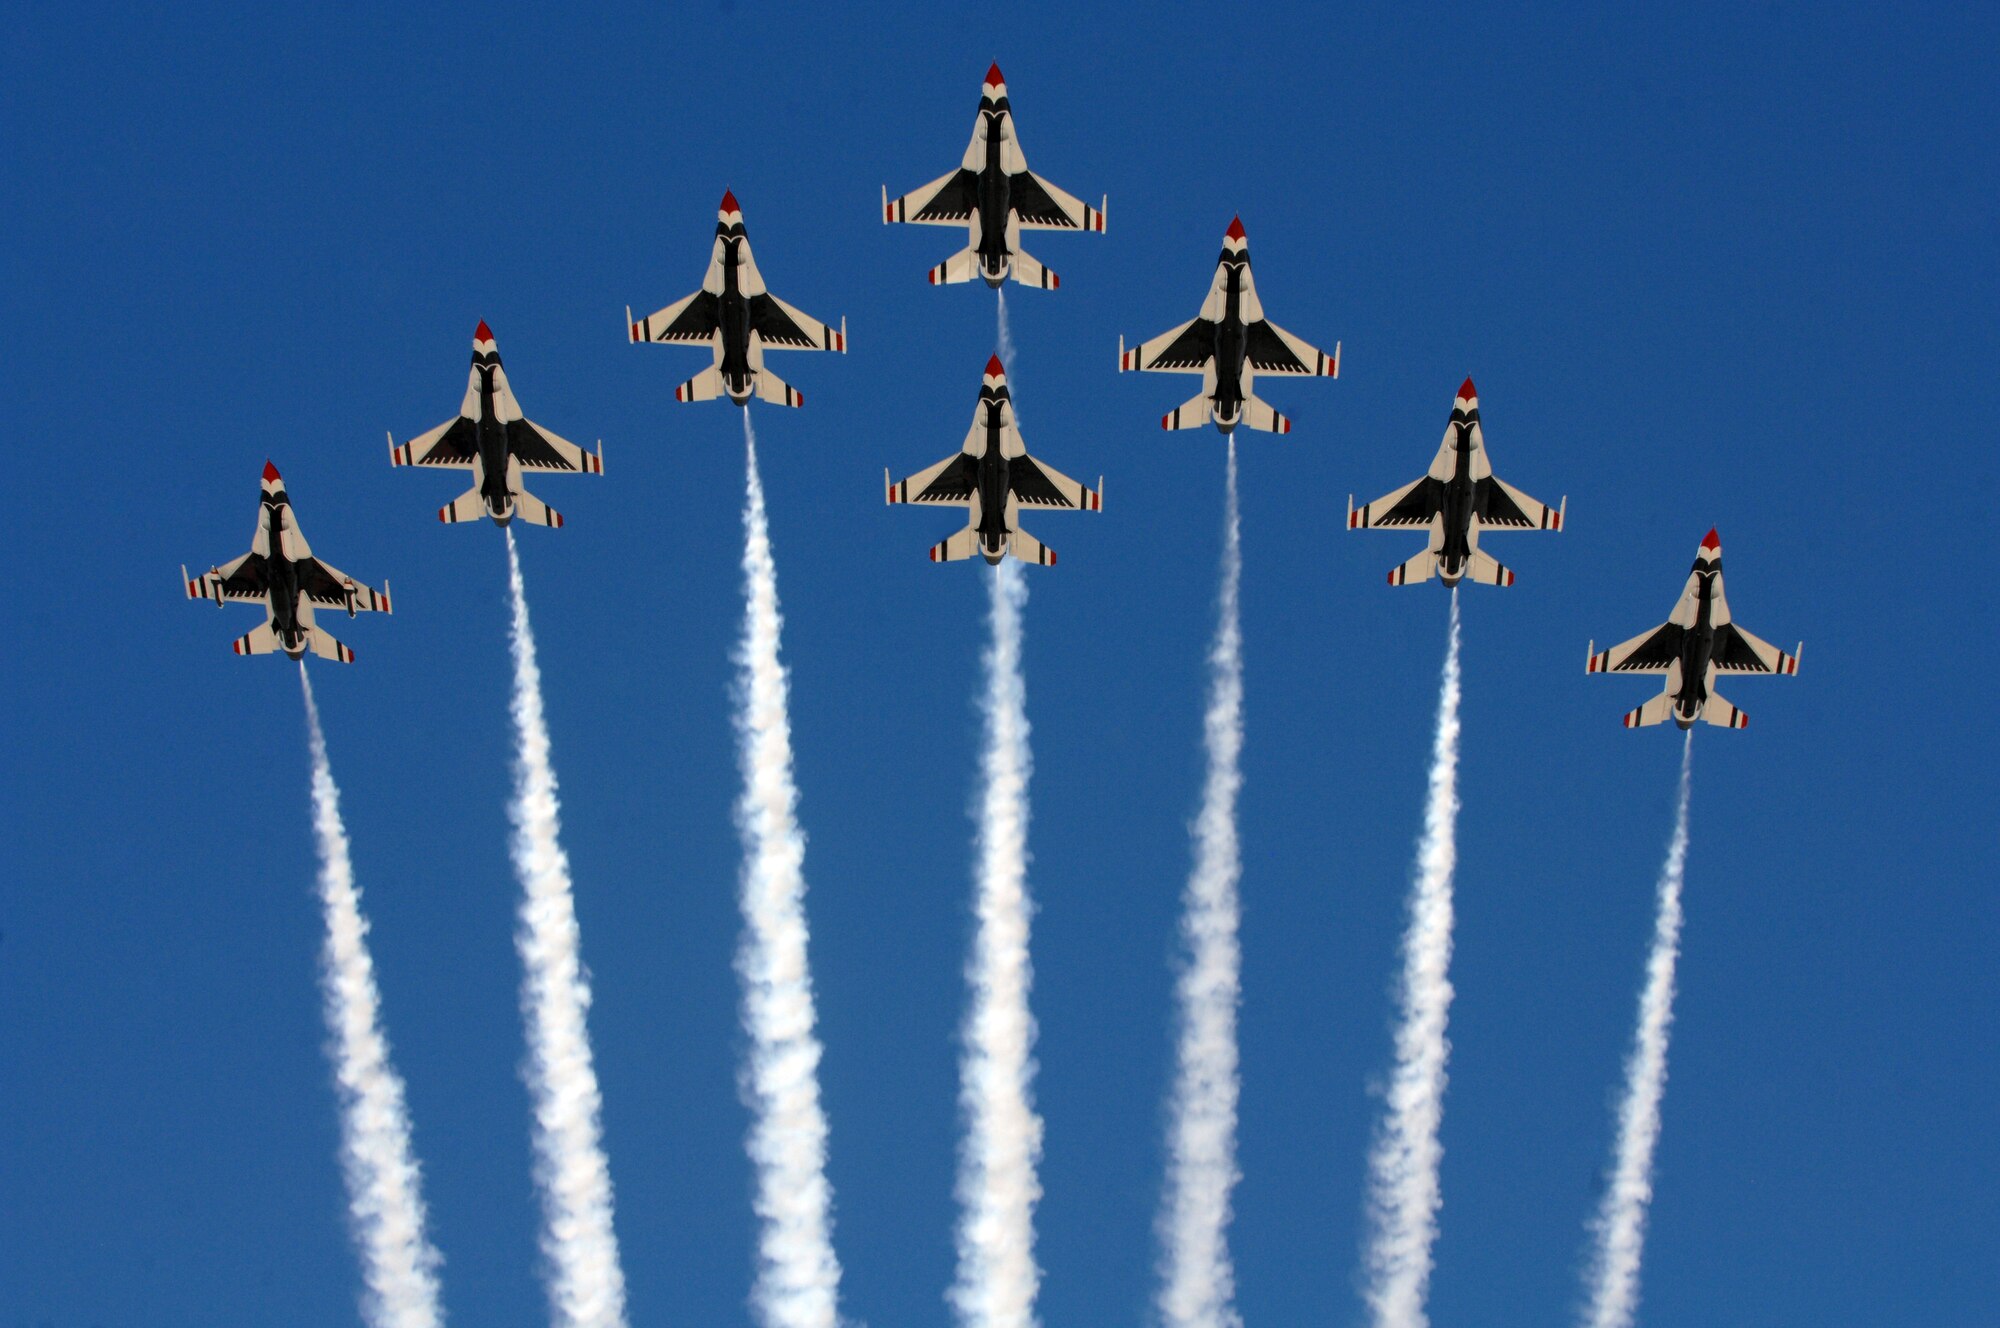 The Thunderbirds are scheduled to perform Oct. 9 at Kirtland Air Force Base.